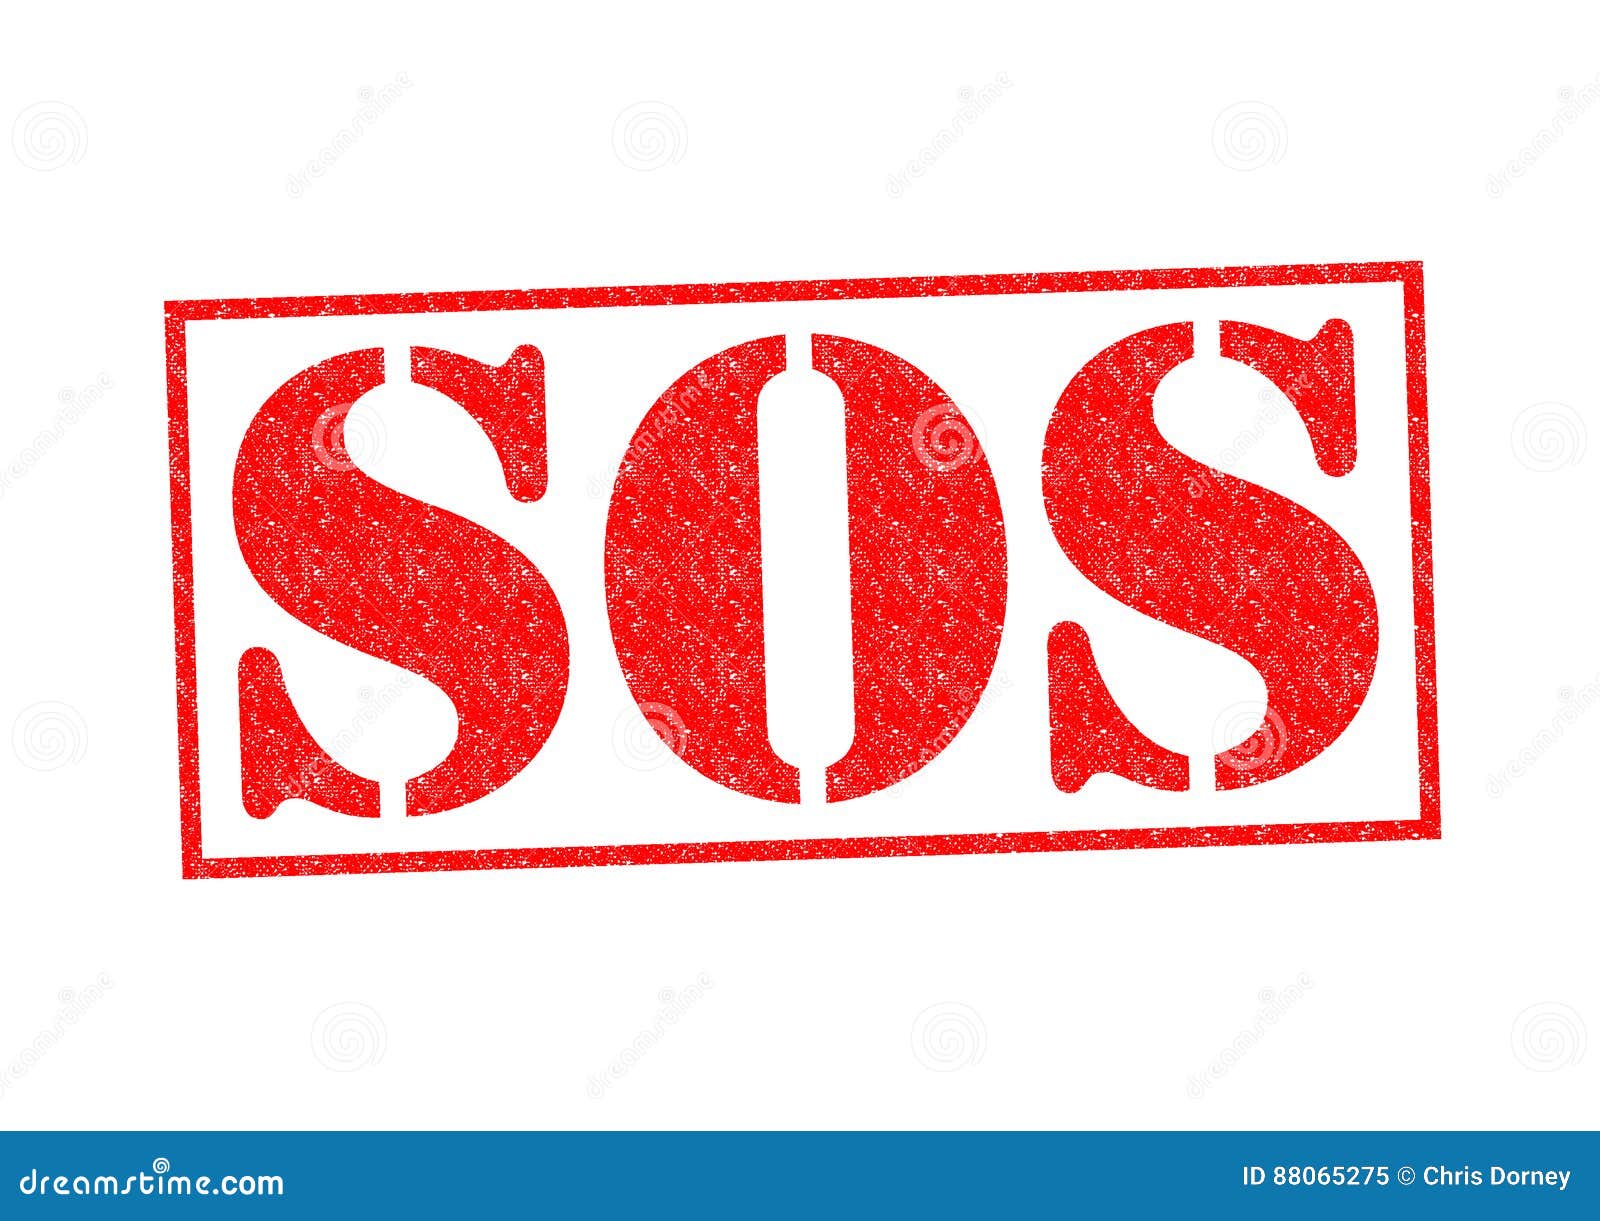 sos rubber stamp